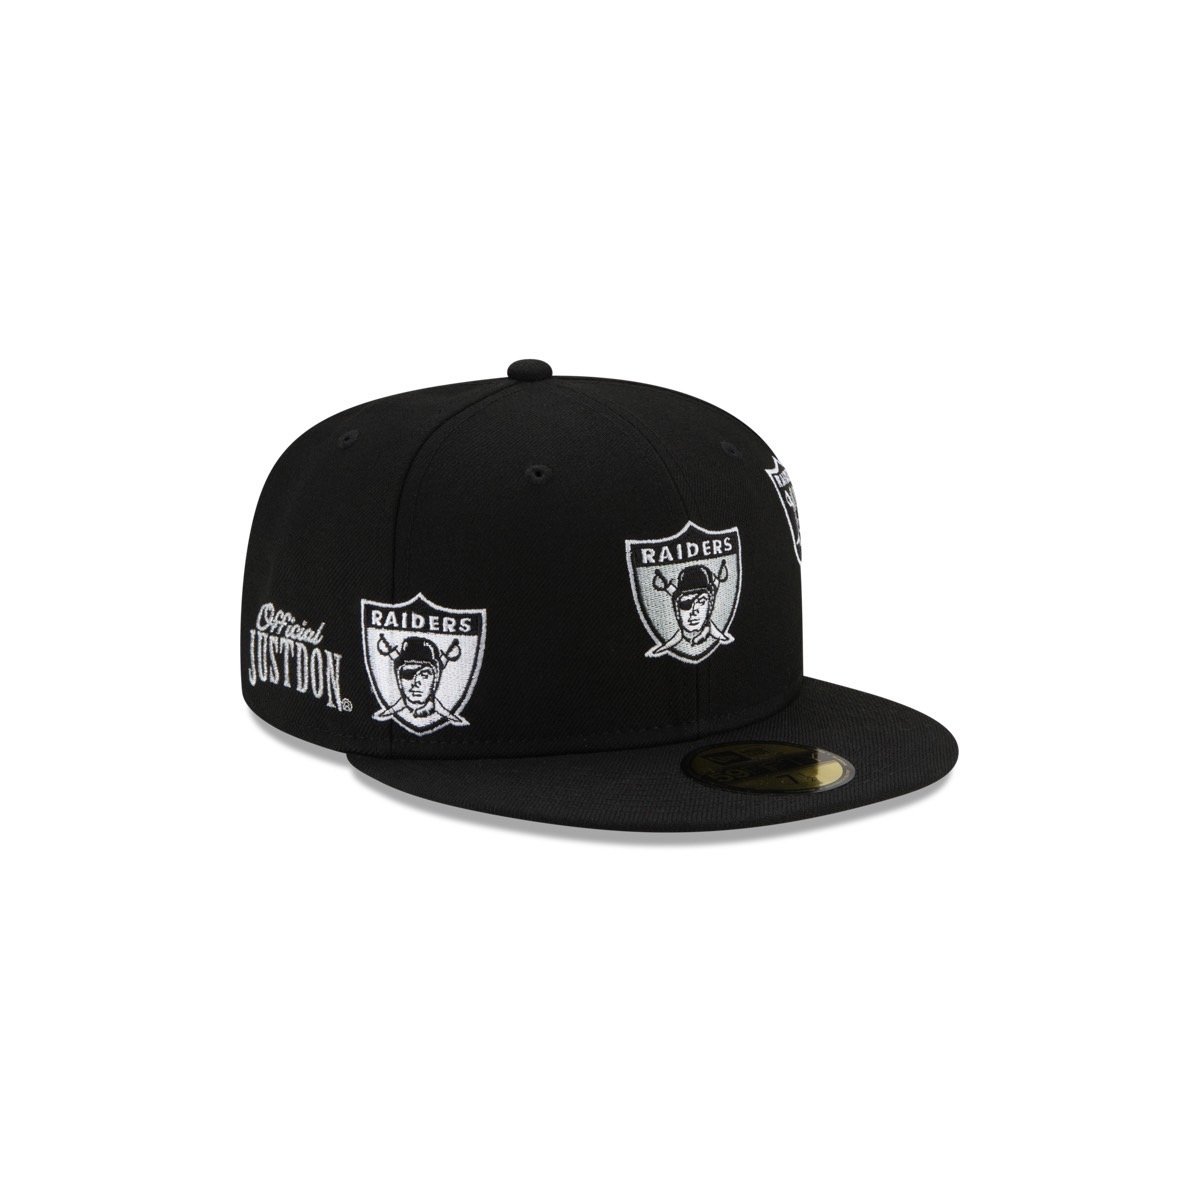 New Era Raiders World Champions 59Fifty Fitted Cap in Black — MAJOR